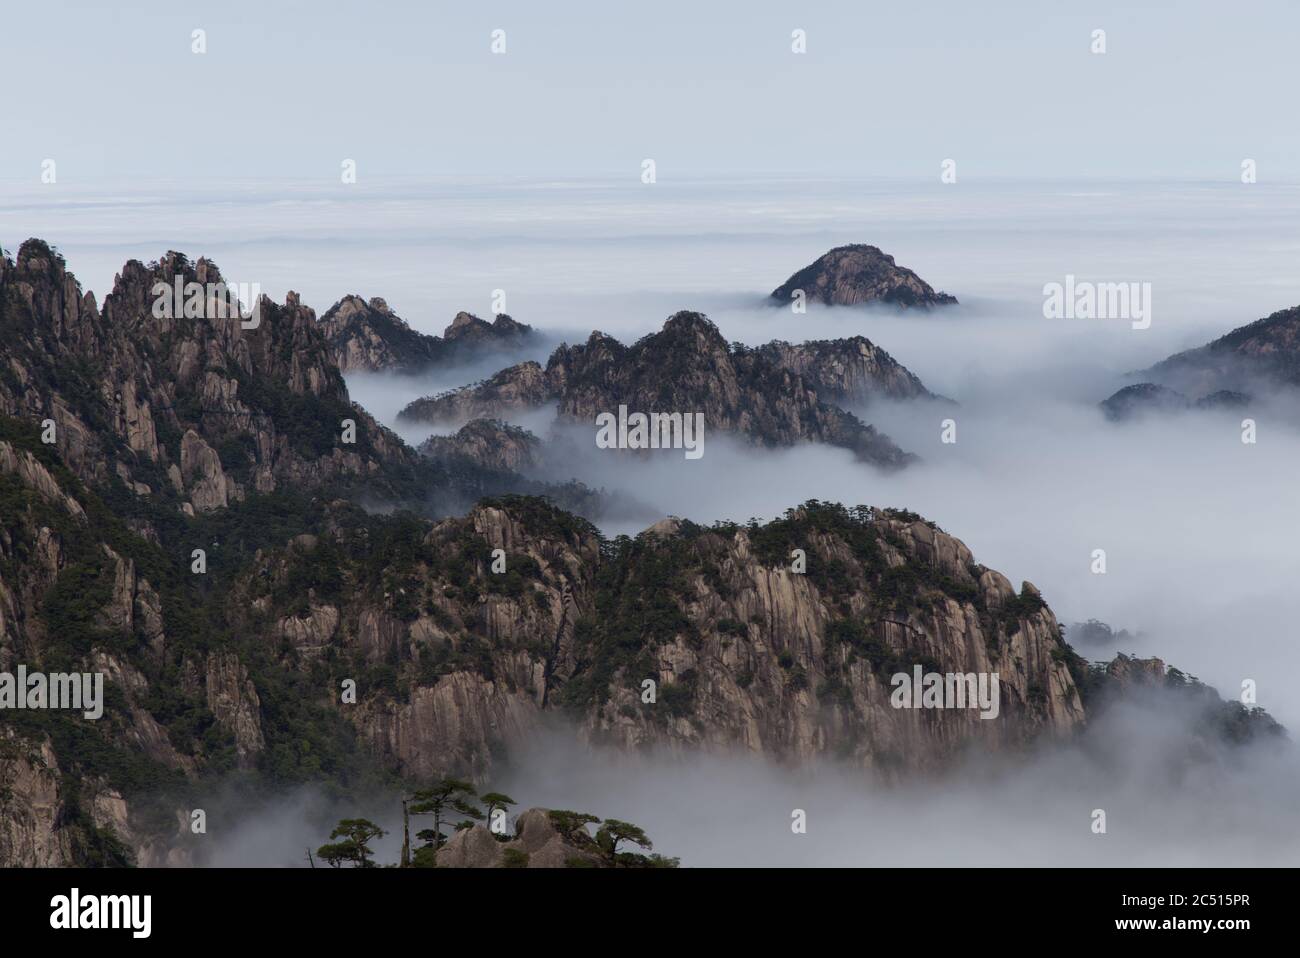 Huangshan or Yellow Mountains engulfed in clouds, Anhui Province, China Stock Photo